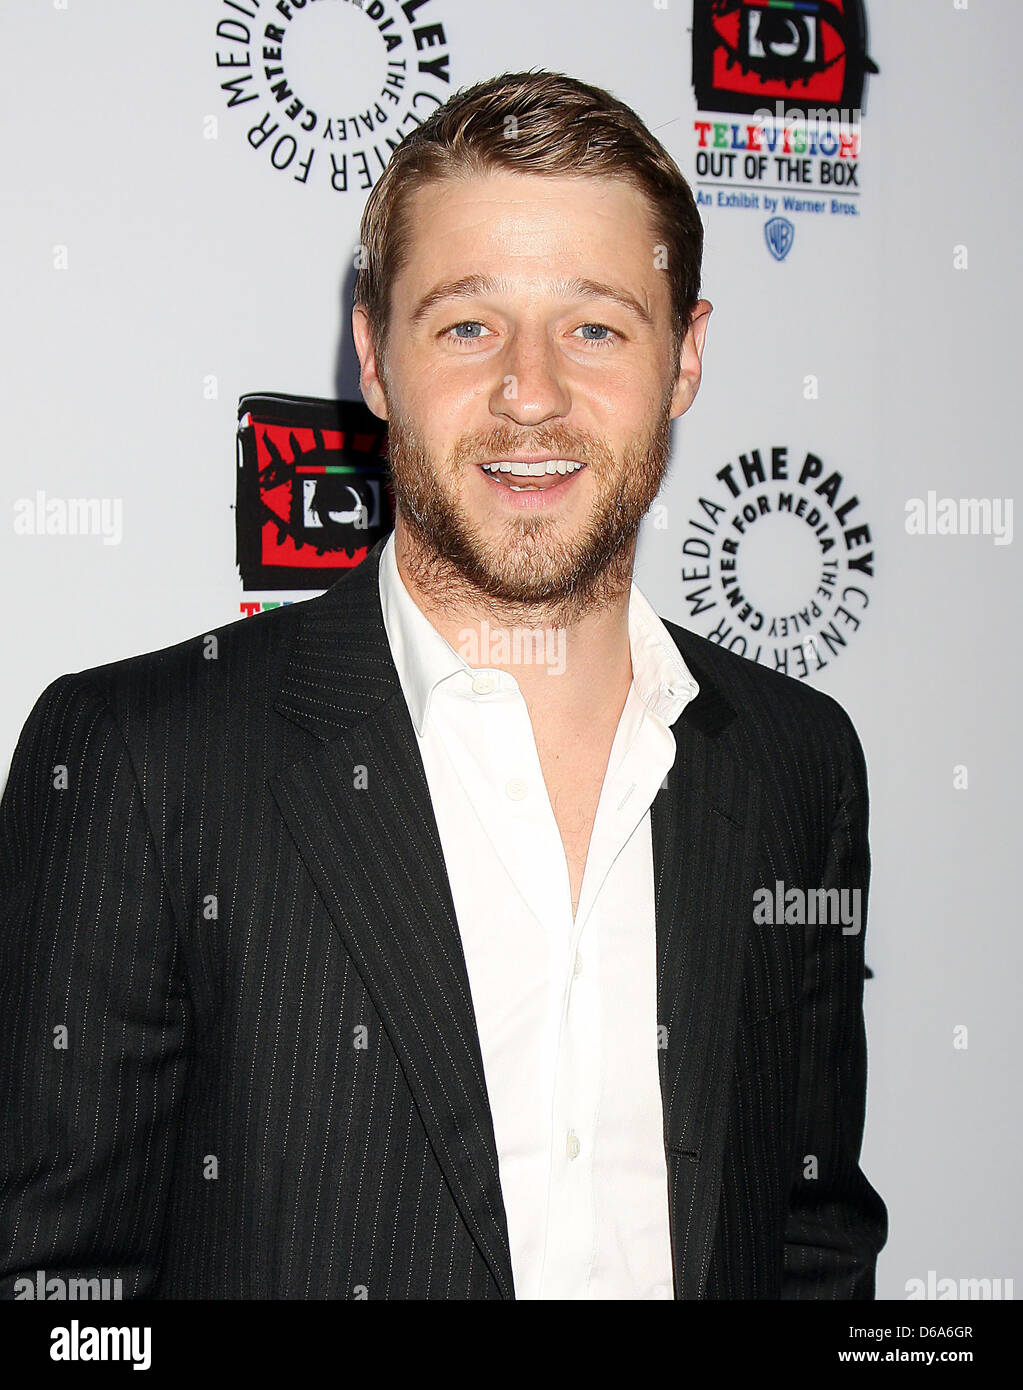 Benjamin McKenzie Warner Brothers presents 'Television: Out of the Box' at The Paley Center for Media Beverly Hills, California Stock Photo